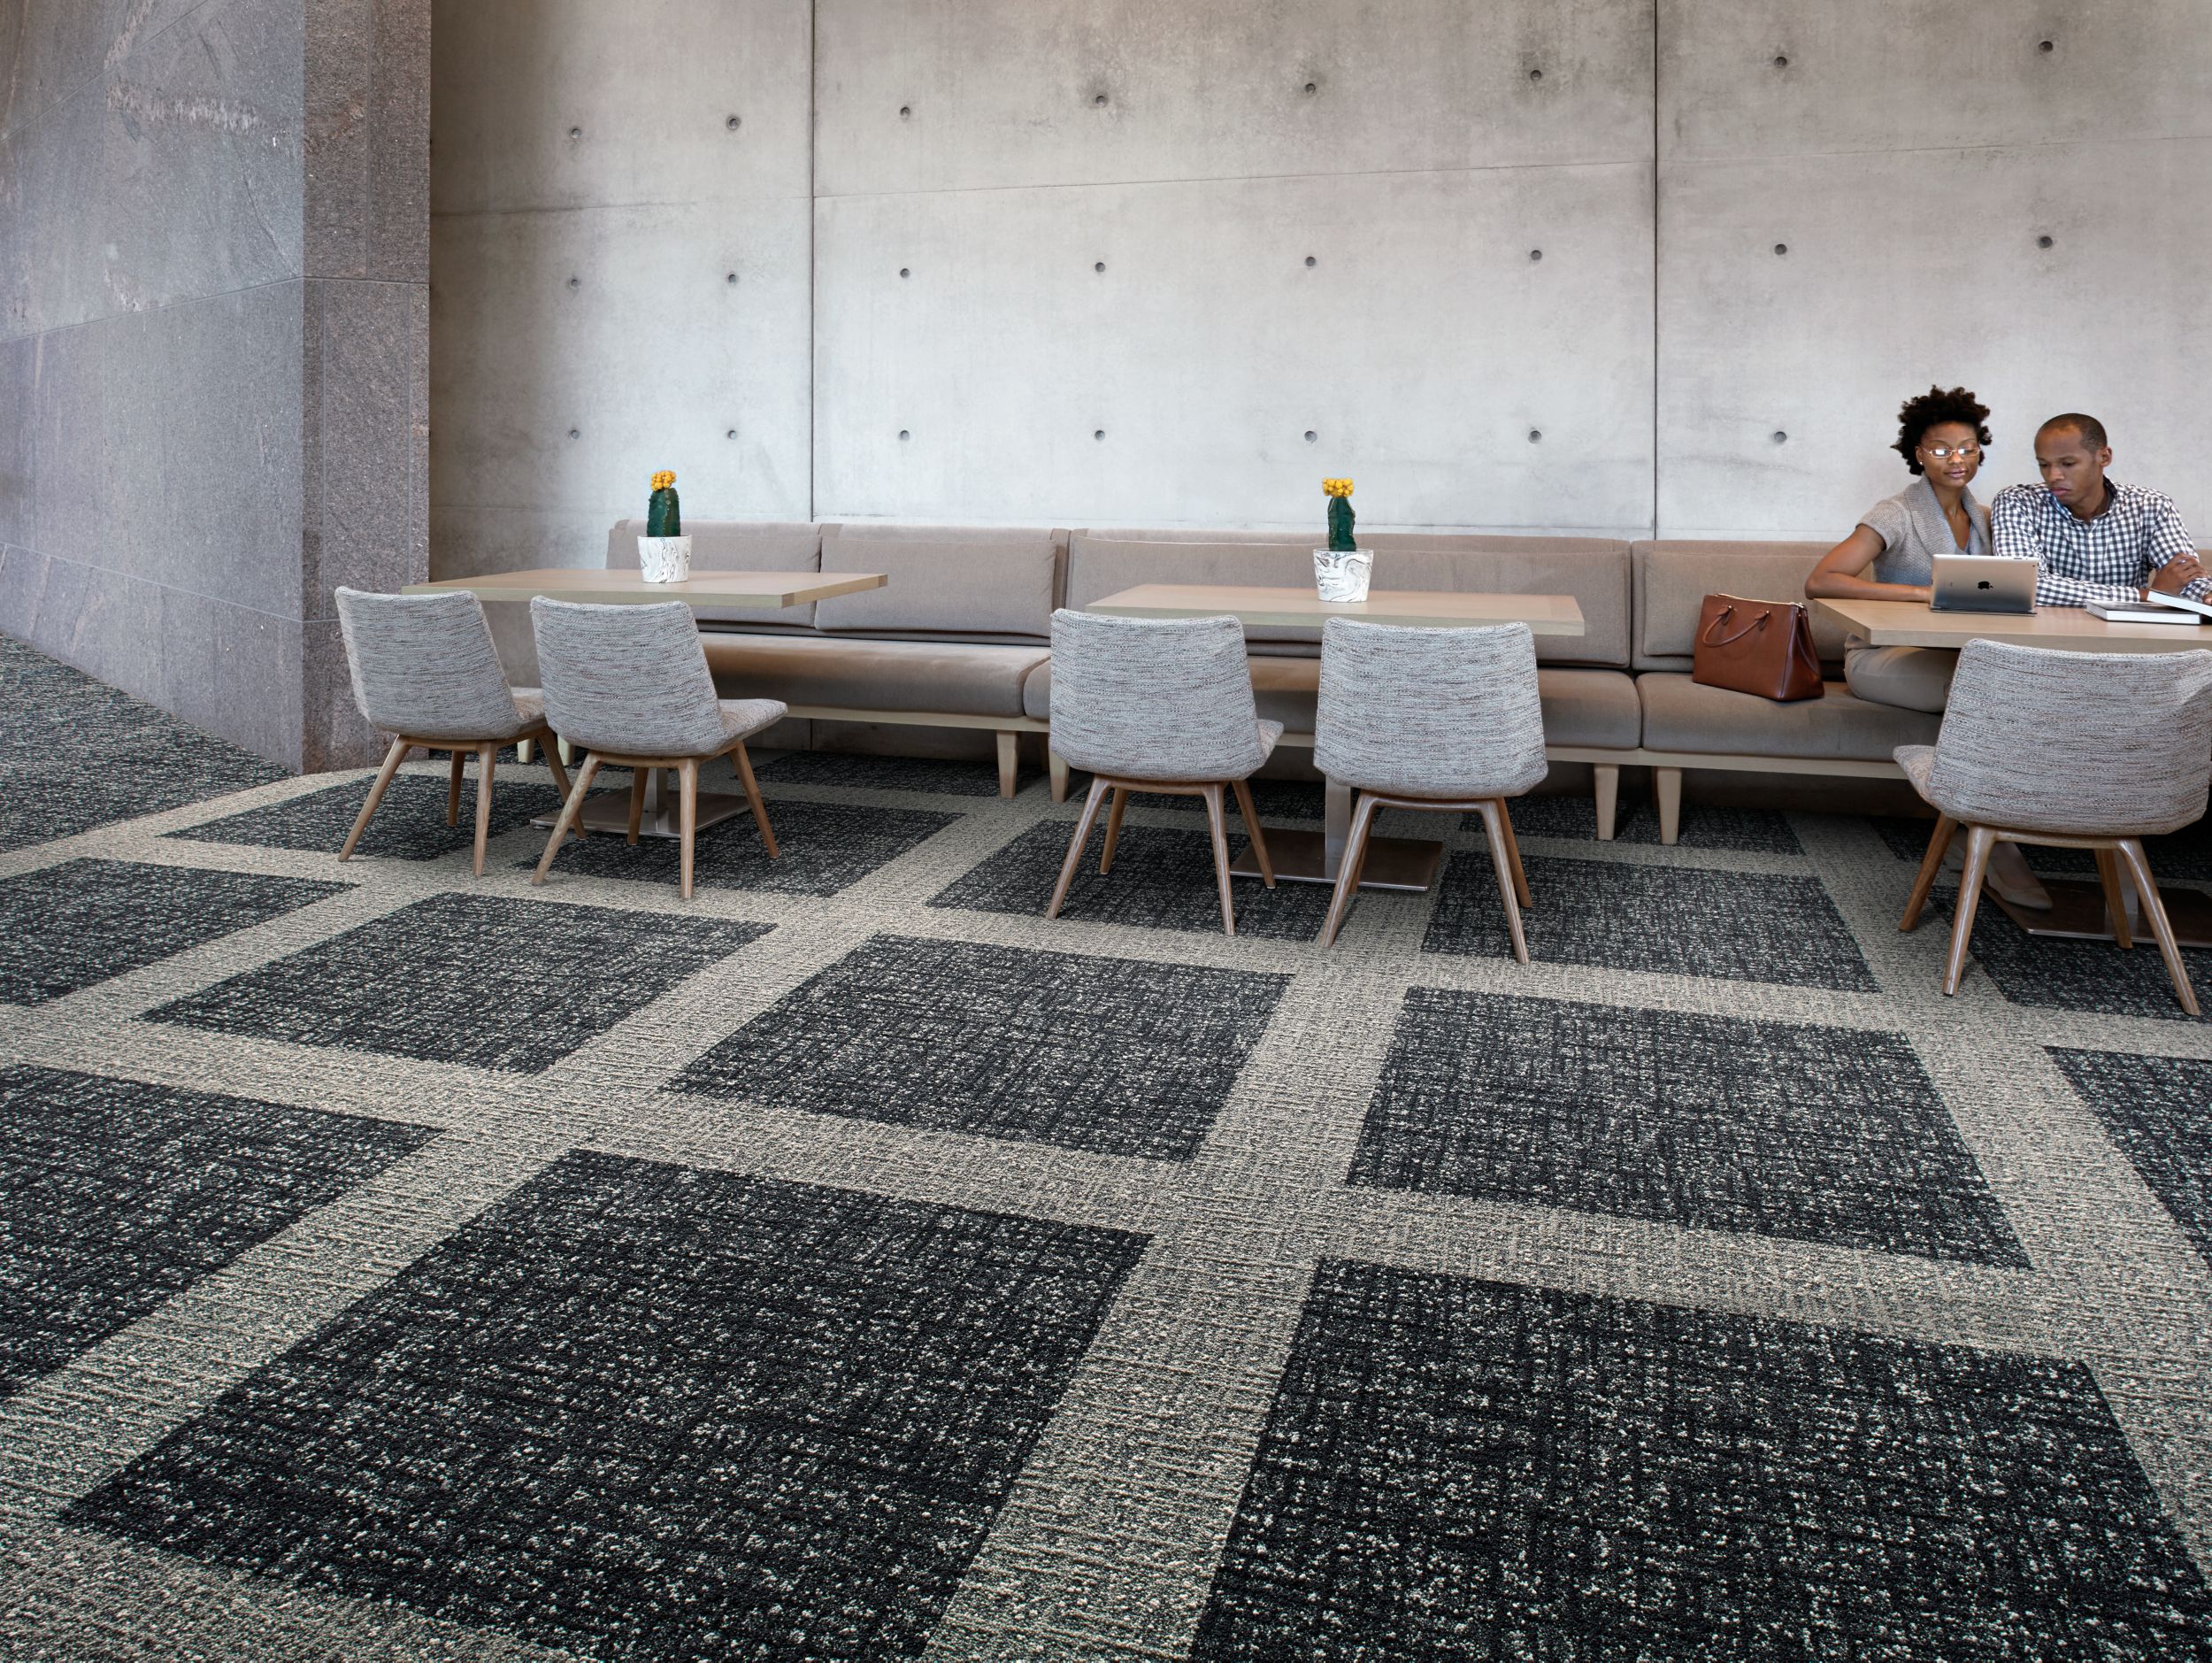 image Interface WW895 plank carpet tile and Textured Woodgrains LVT in office common area with tables and chairs numéro 6